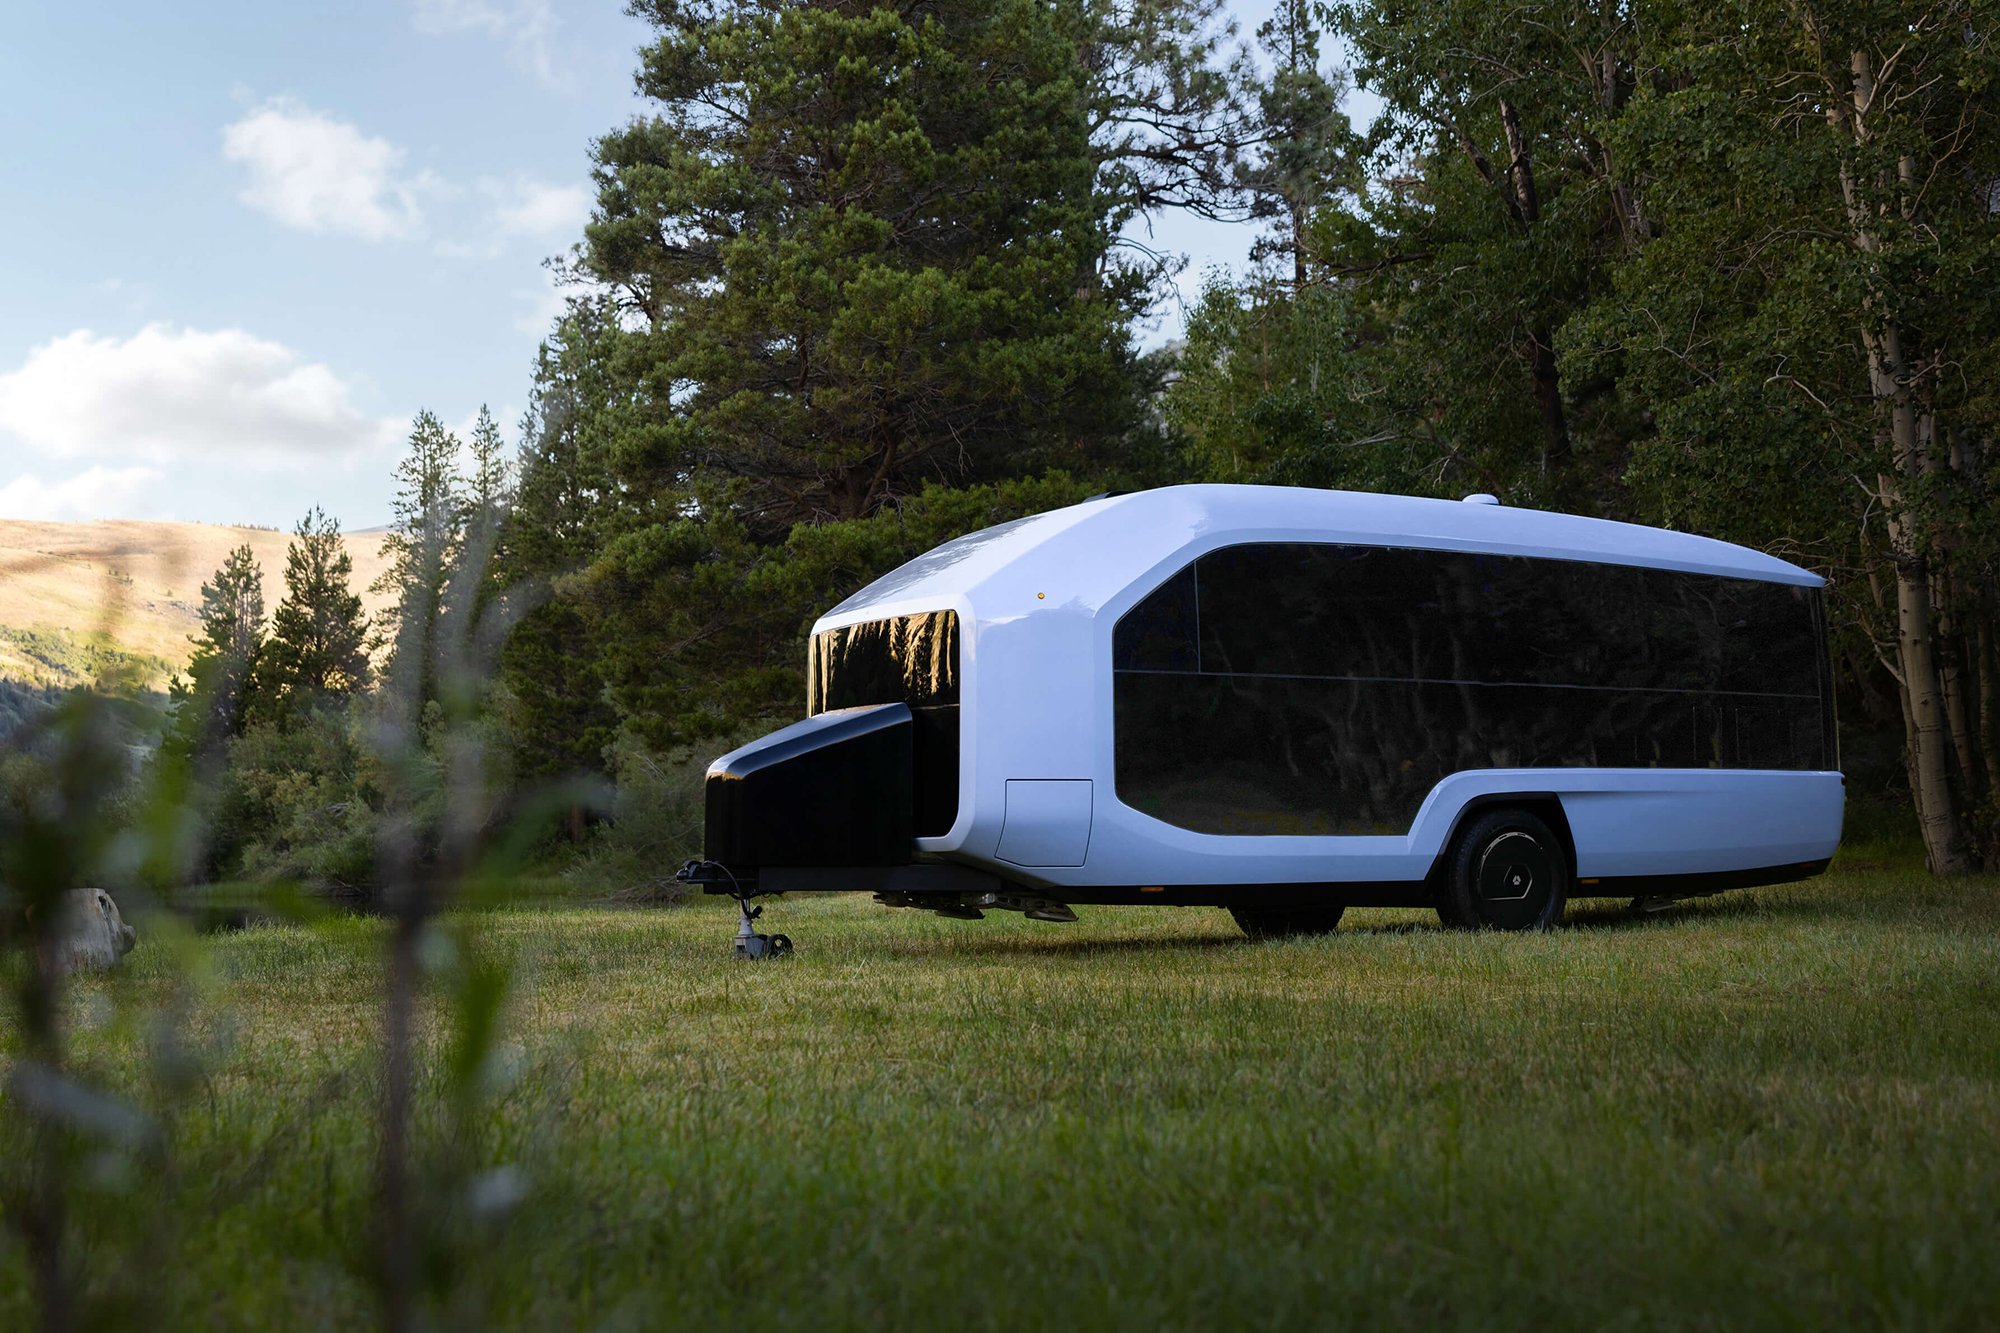 Exterior design of the all-electric, self-propelled travel trailer